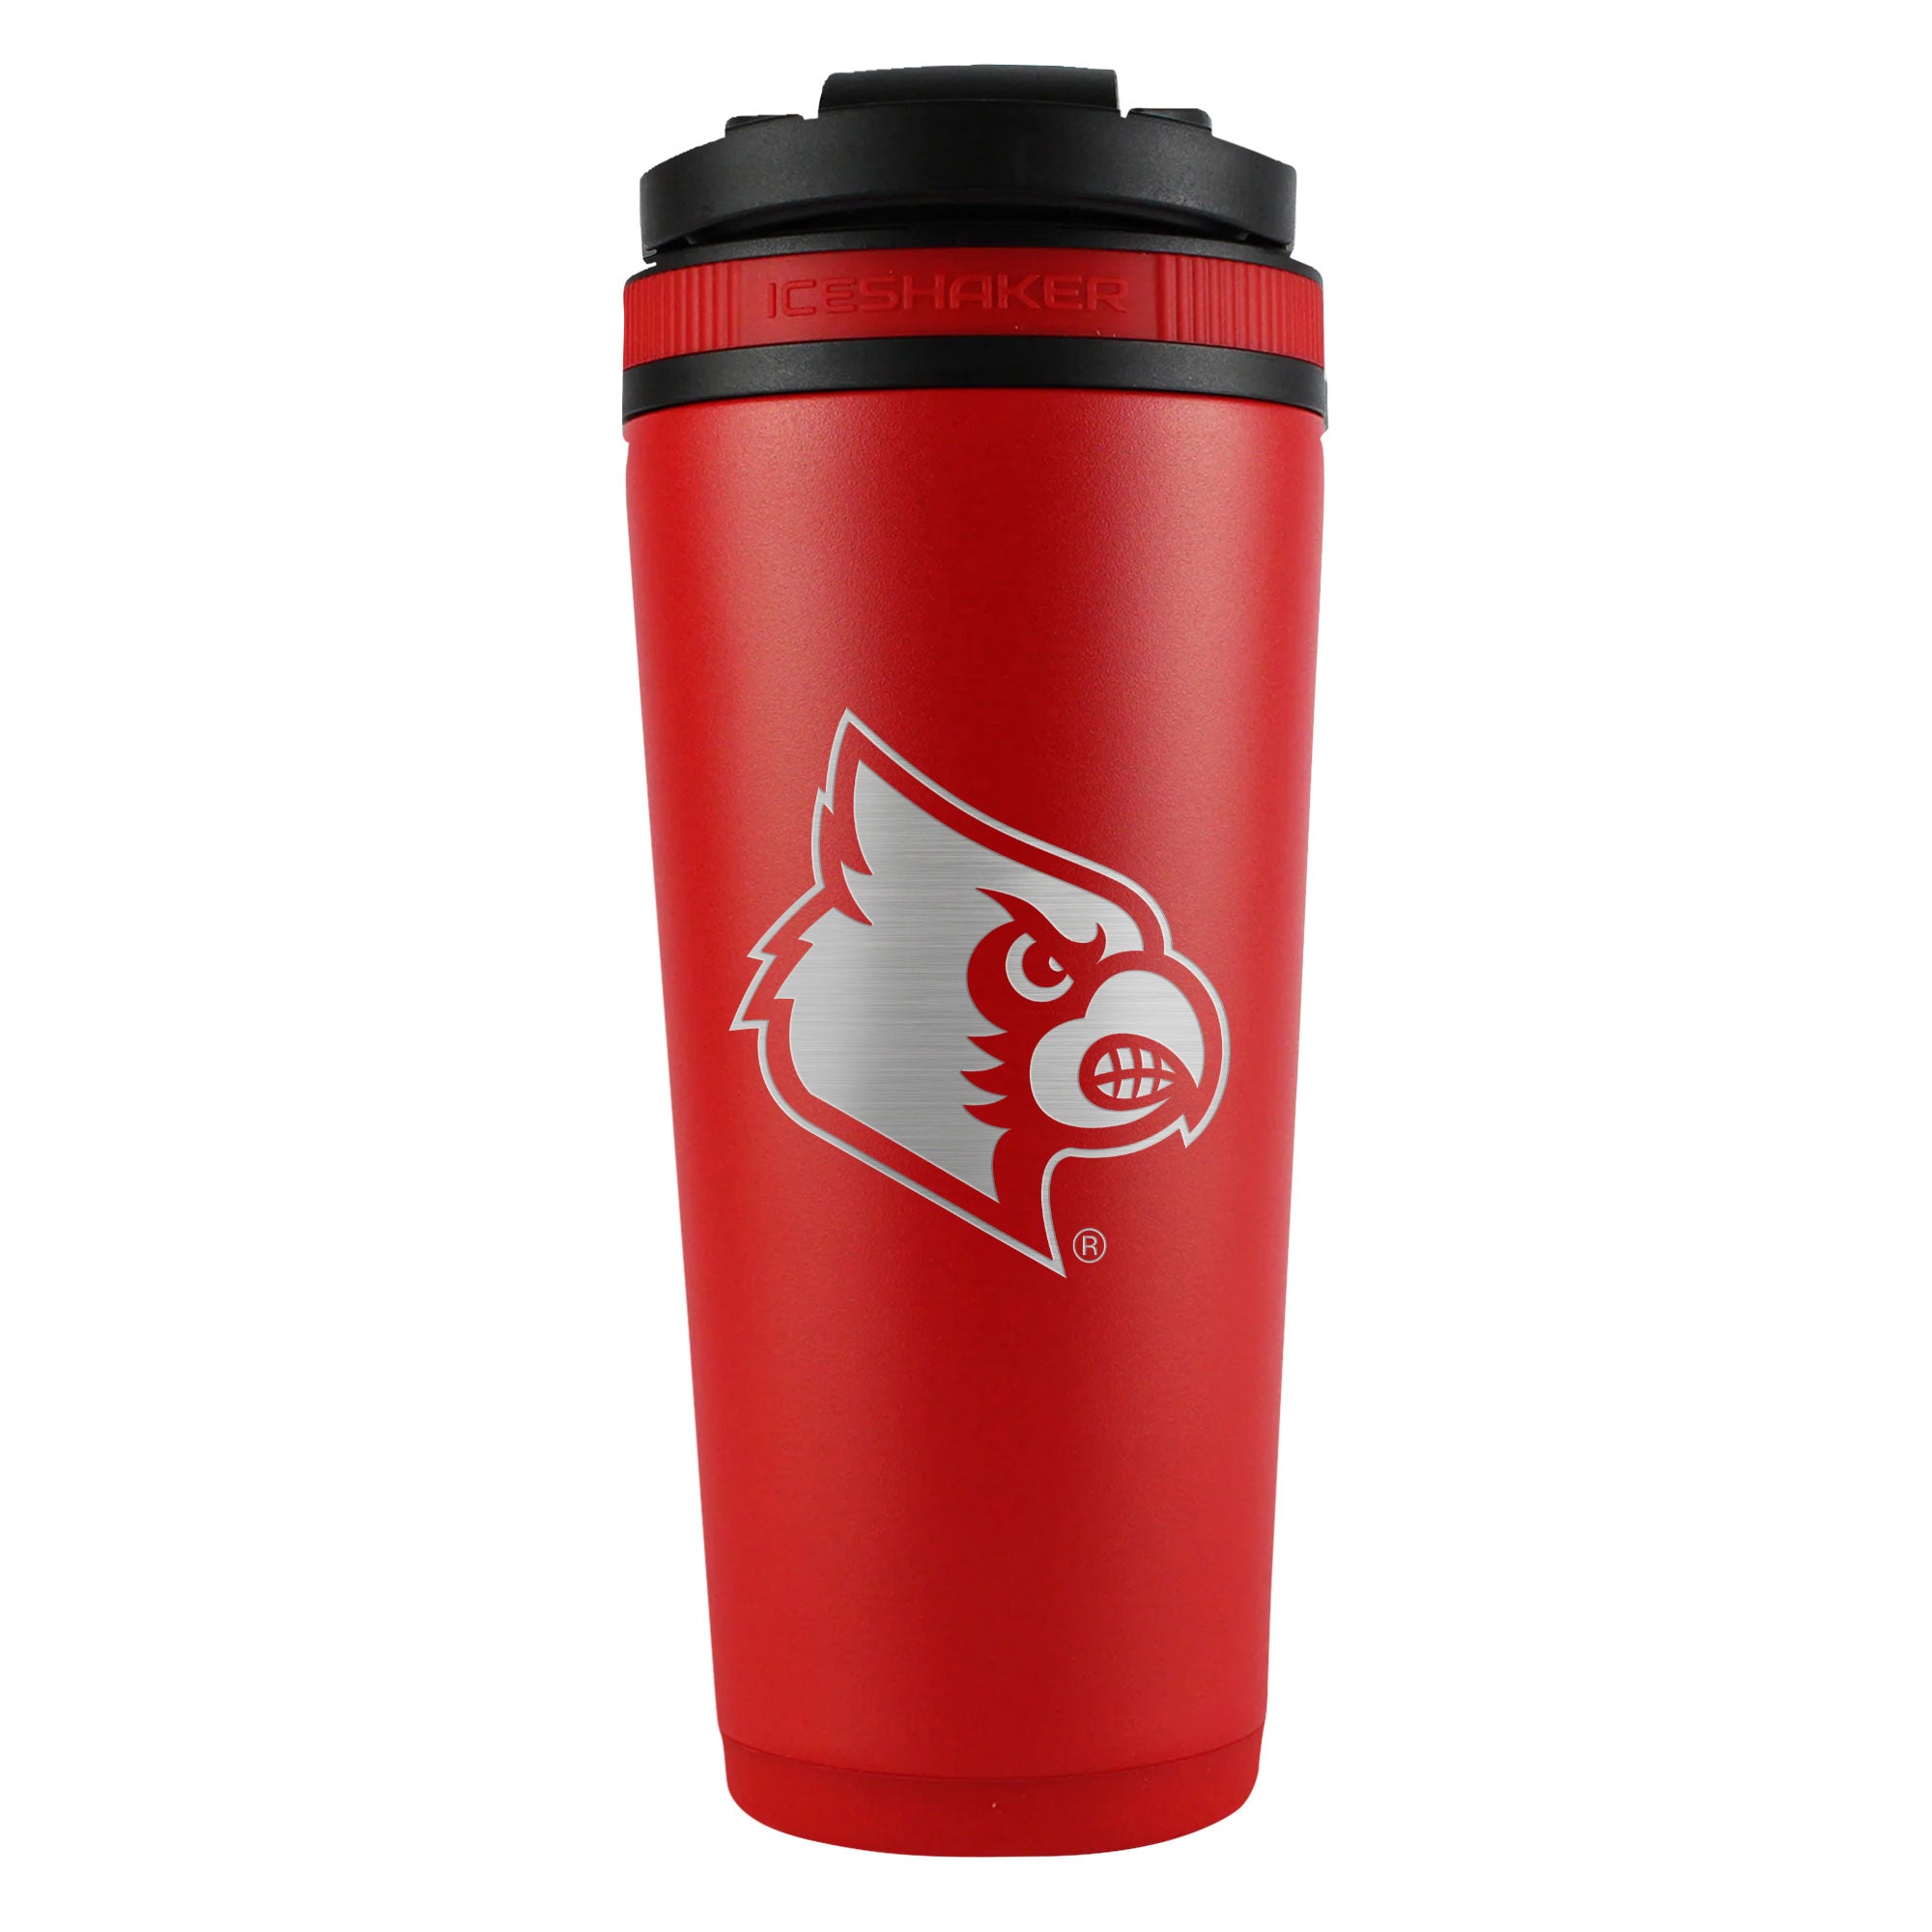 Officially Licensed University of Louisville 26oz Ice Shaker - Red